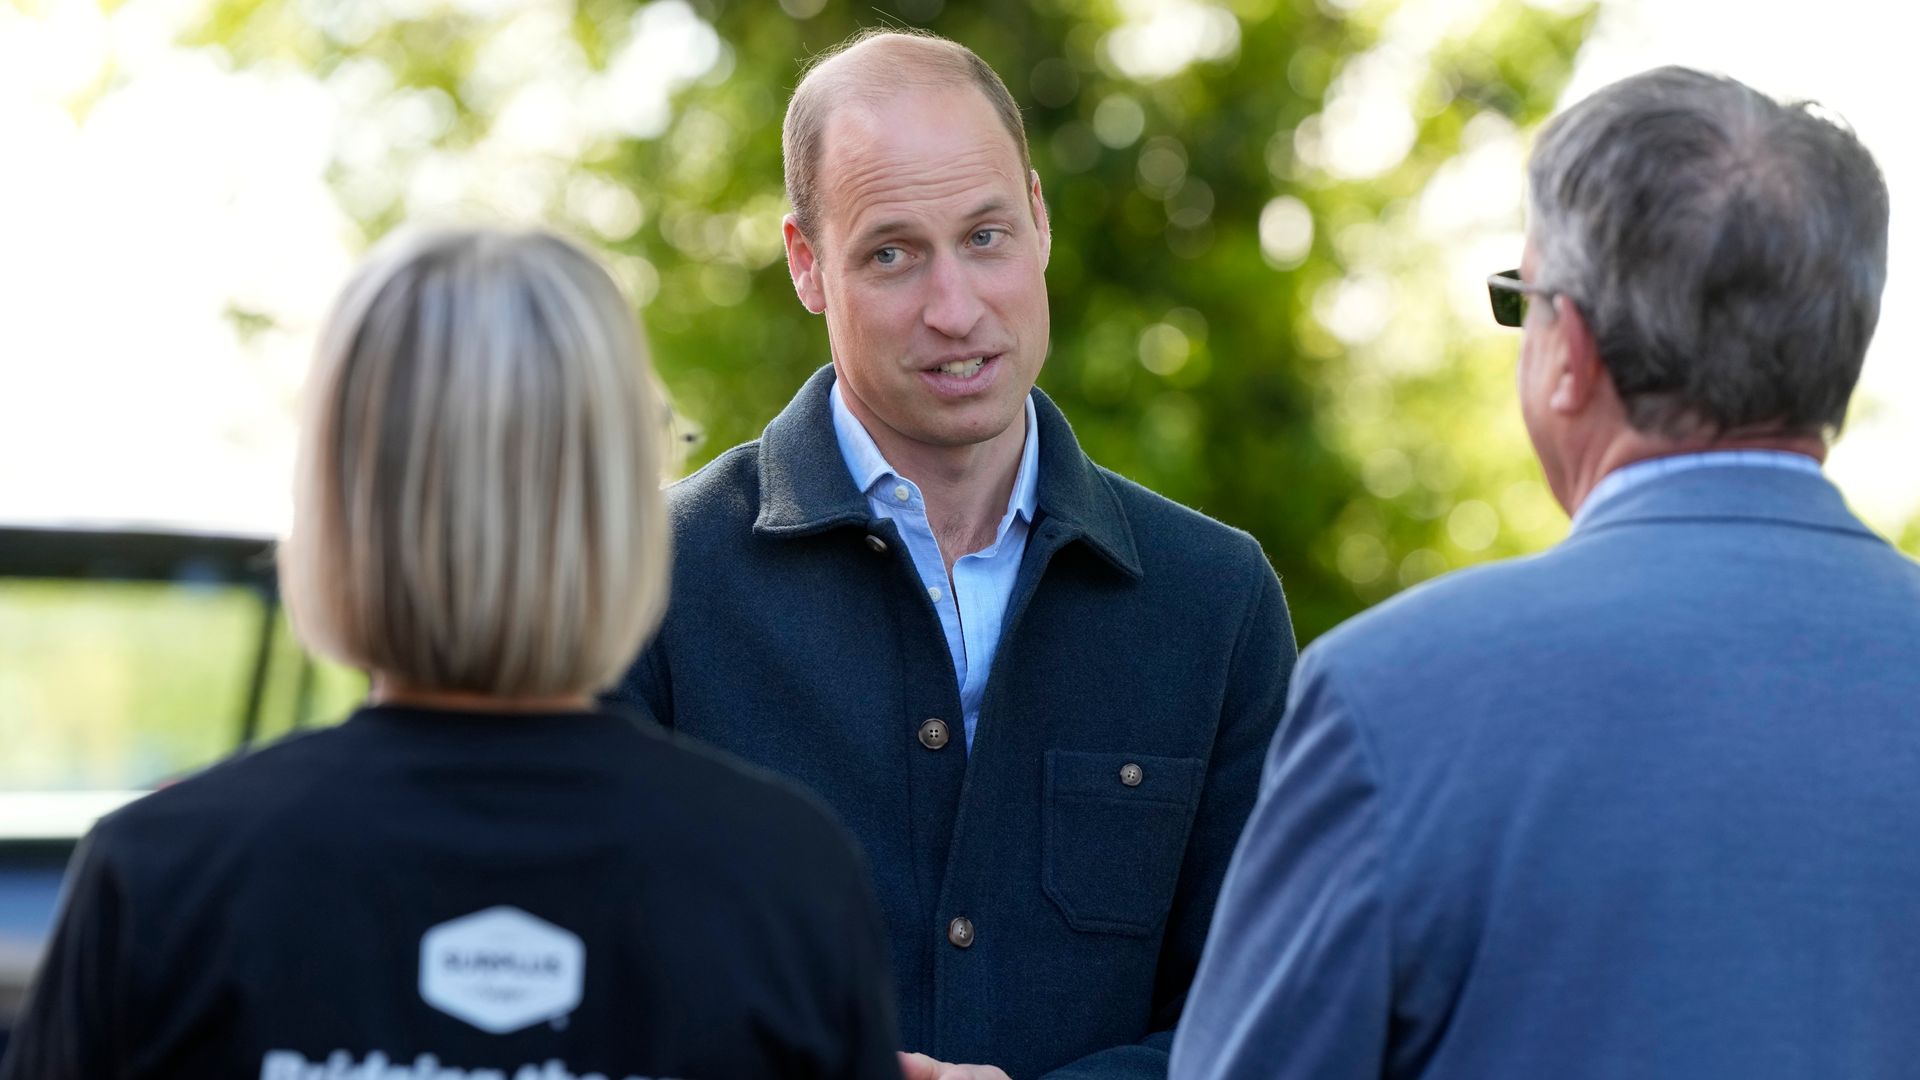 Smiley Prince William returns to work for the first time since Princess Kate's cancer diagnosis